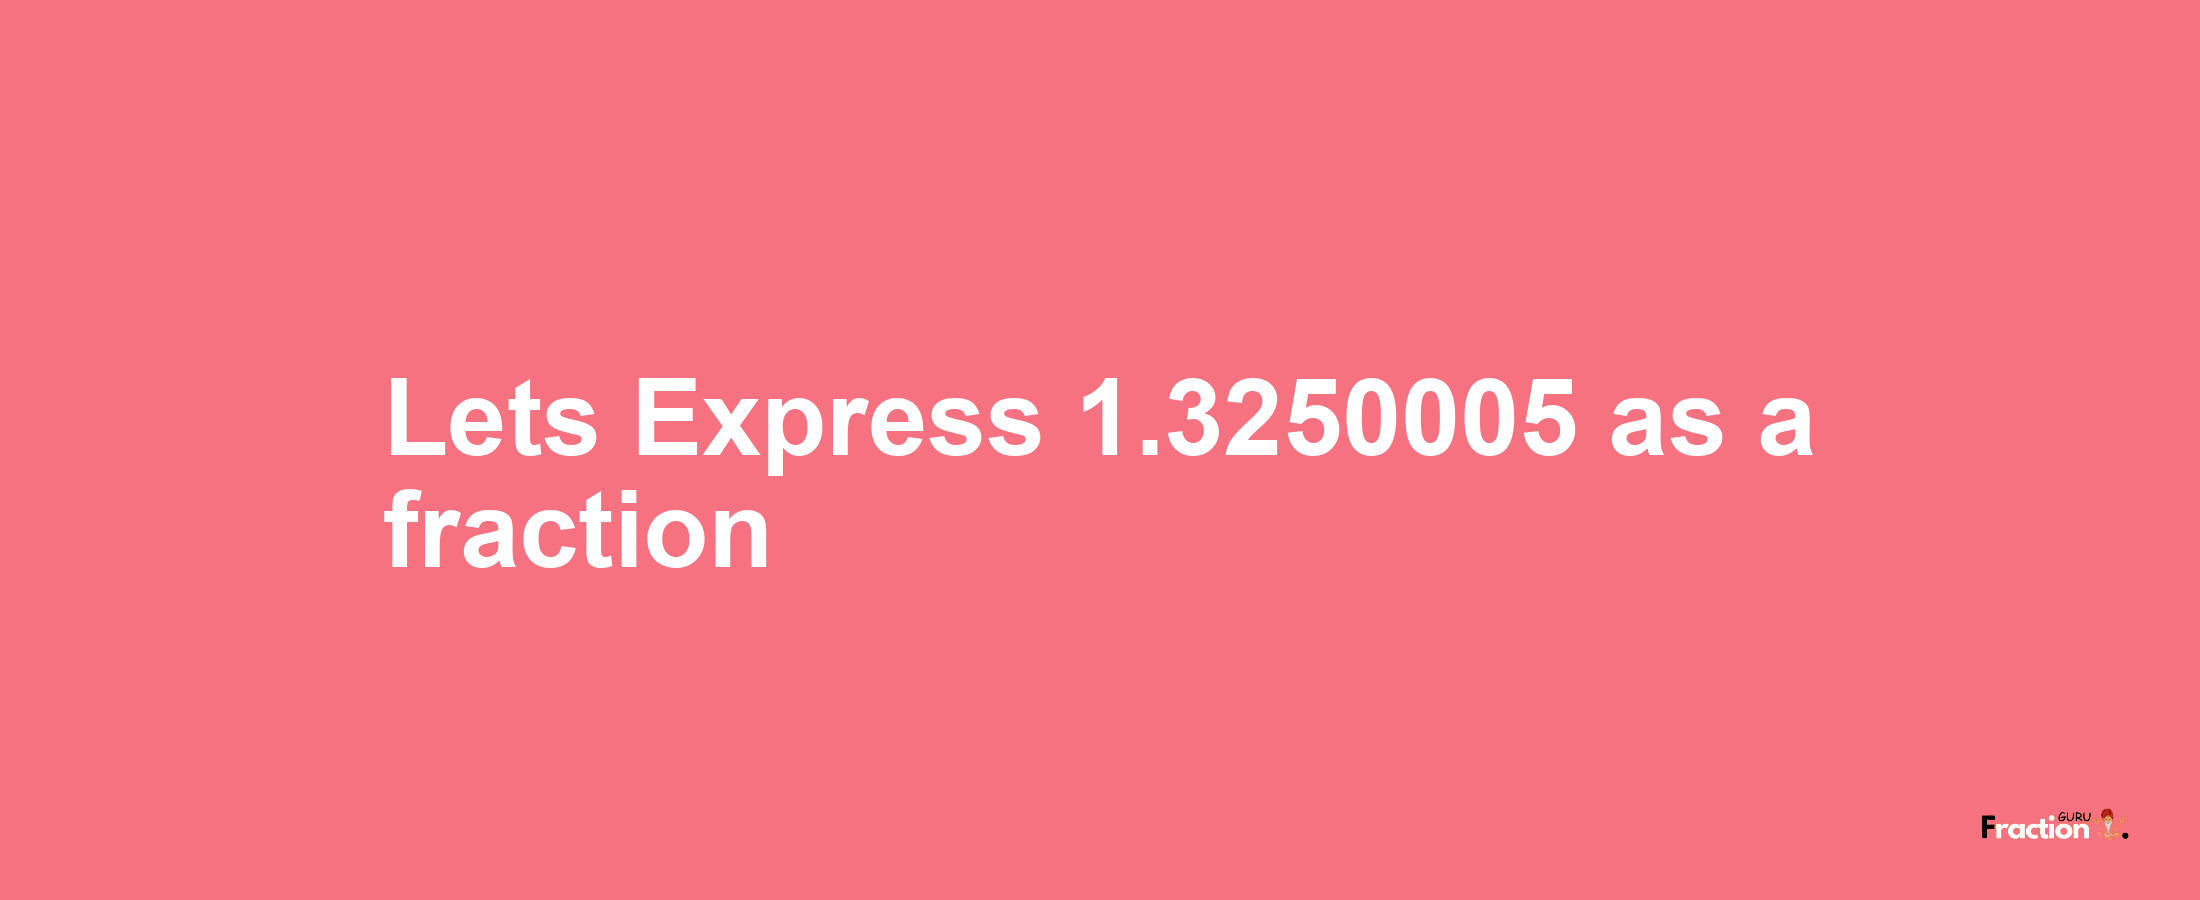 Lets Express 1.3250005 as afraction